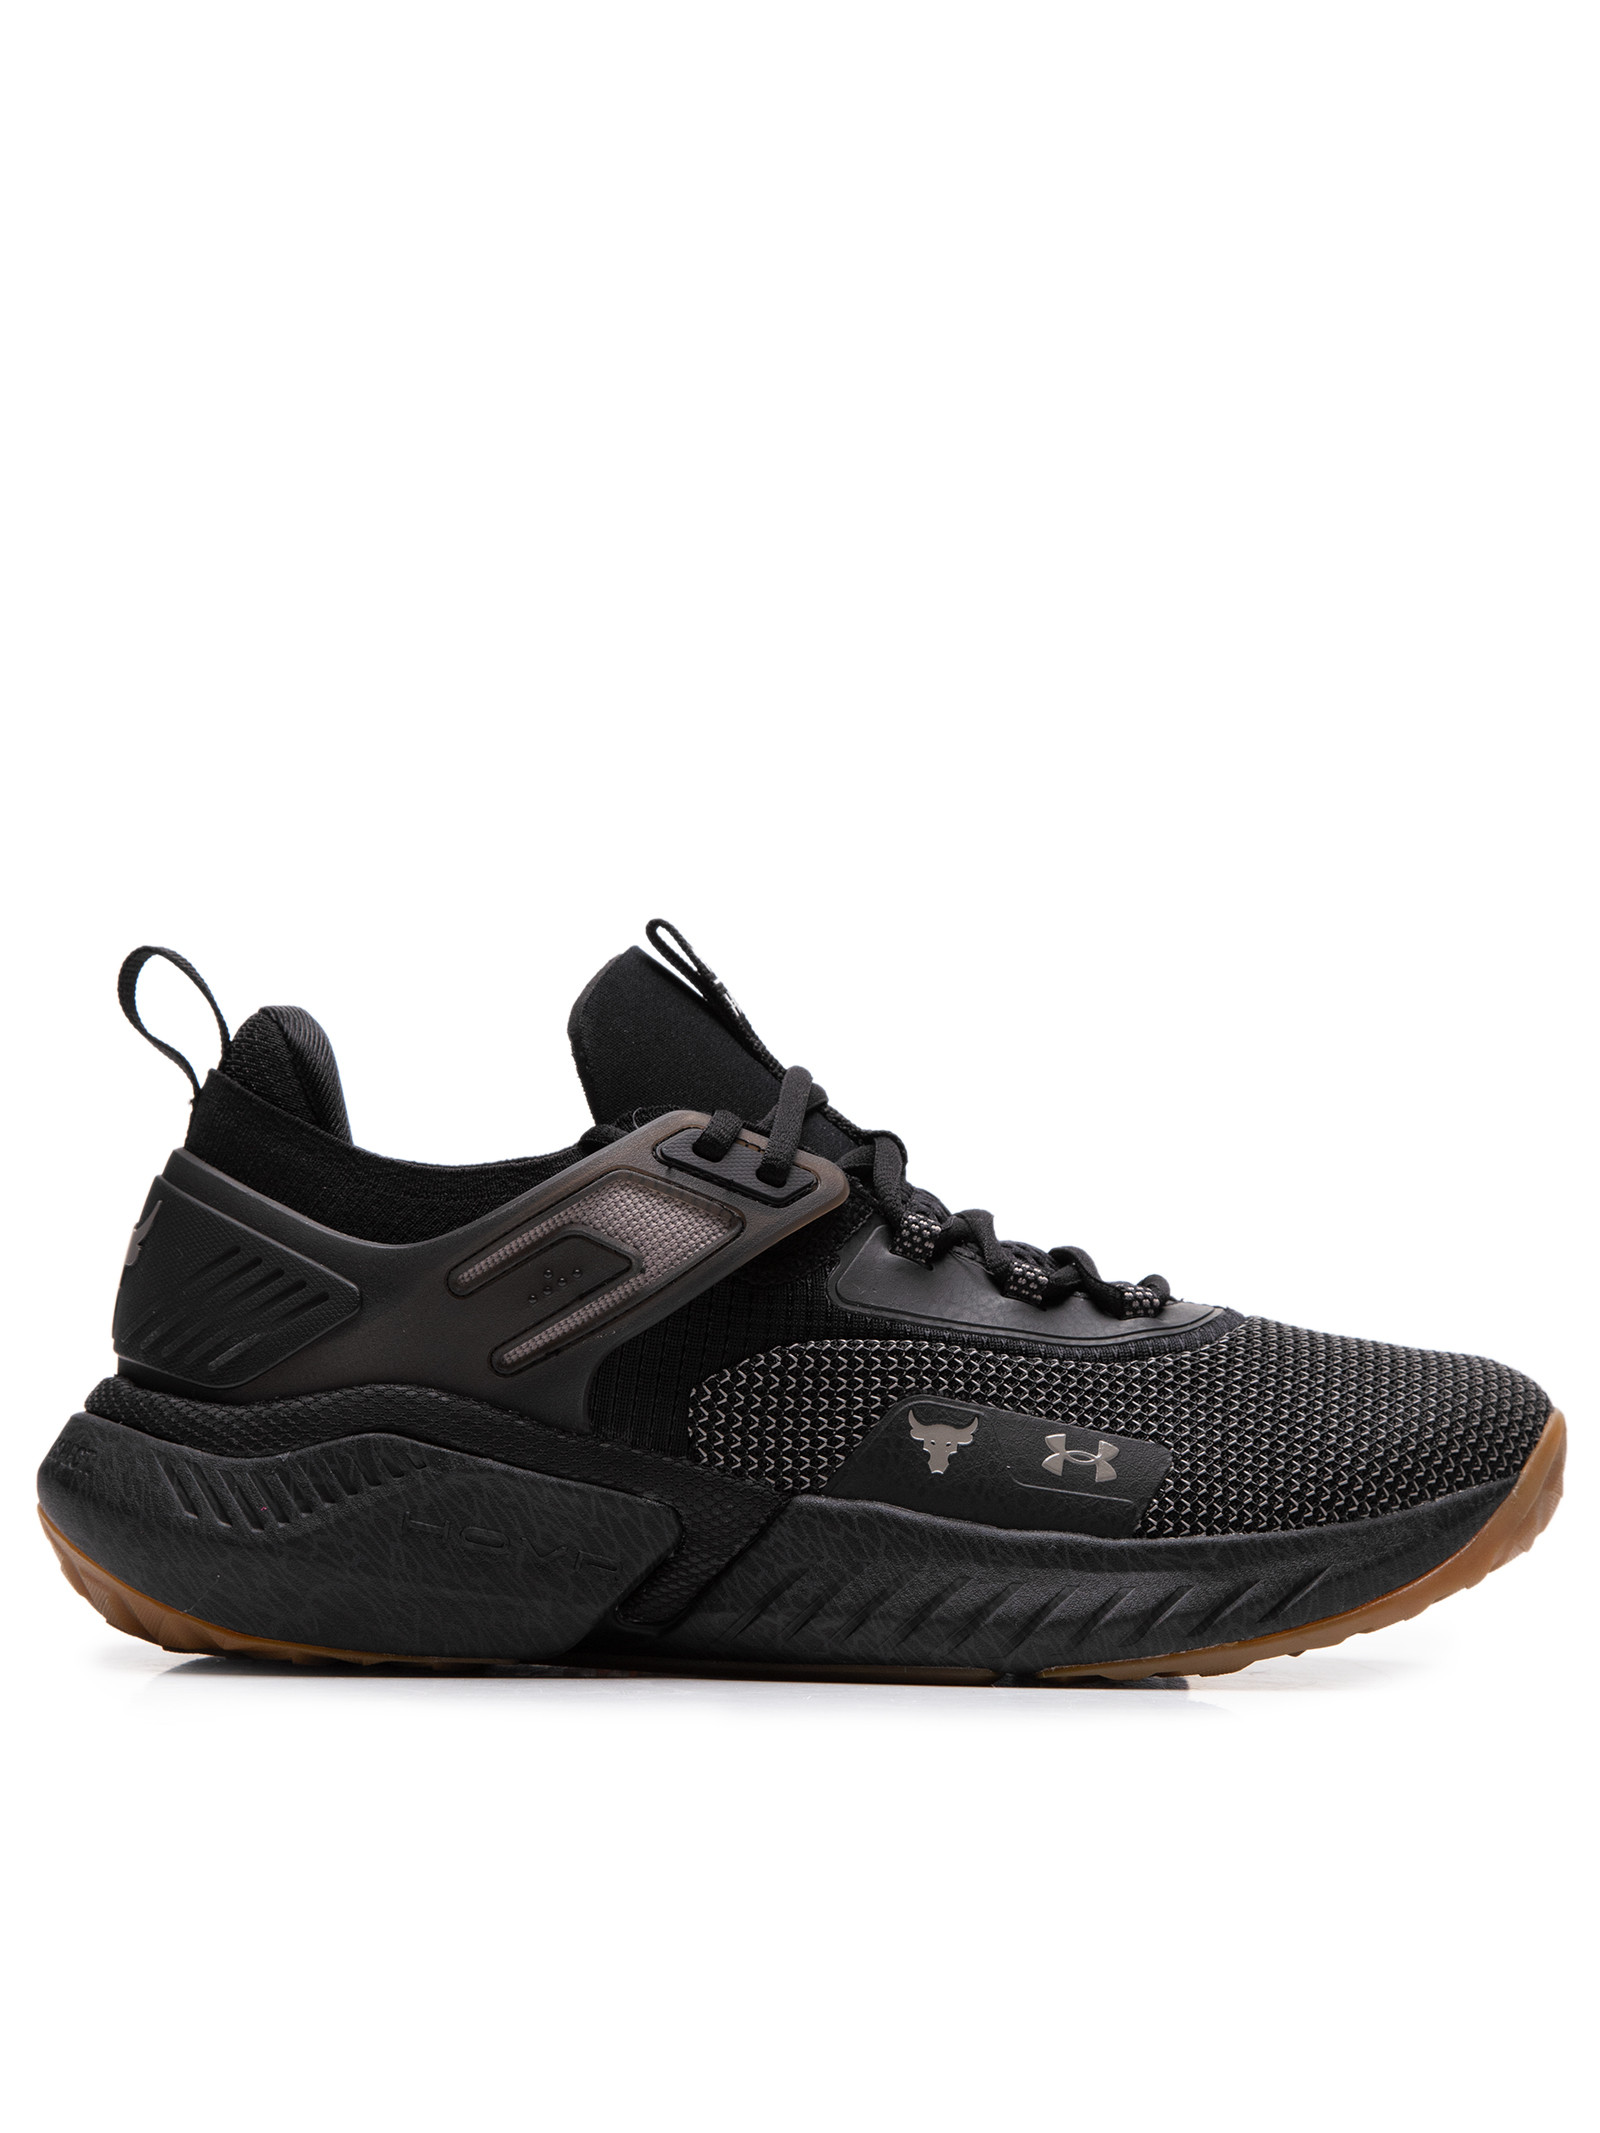 Tênis Under Armour Project Rock BSR - Masculino